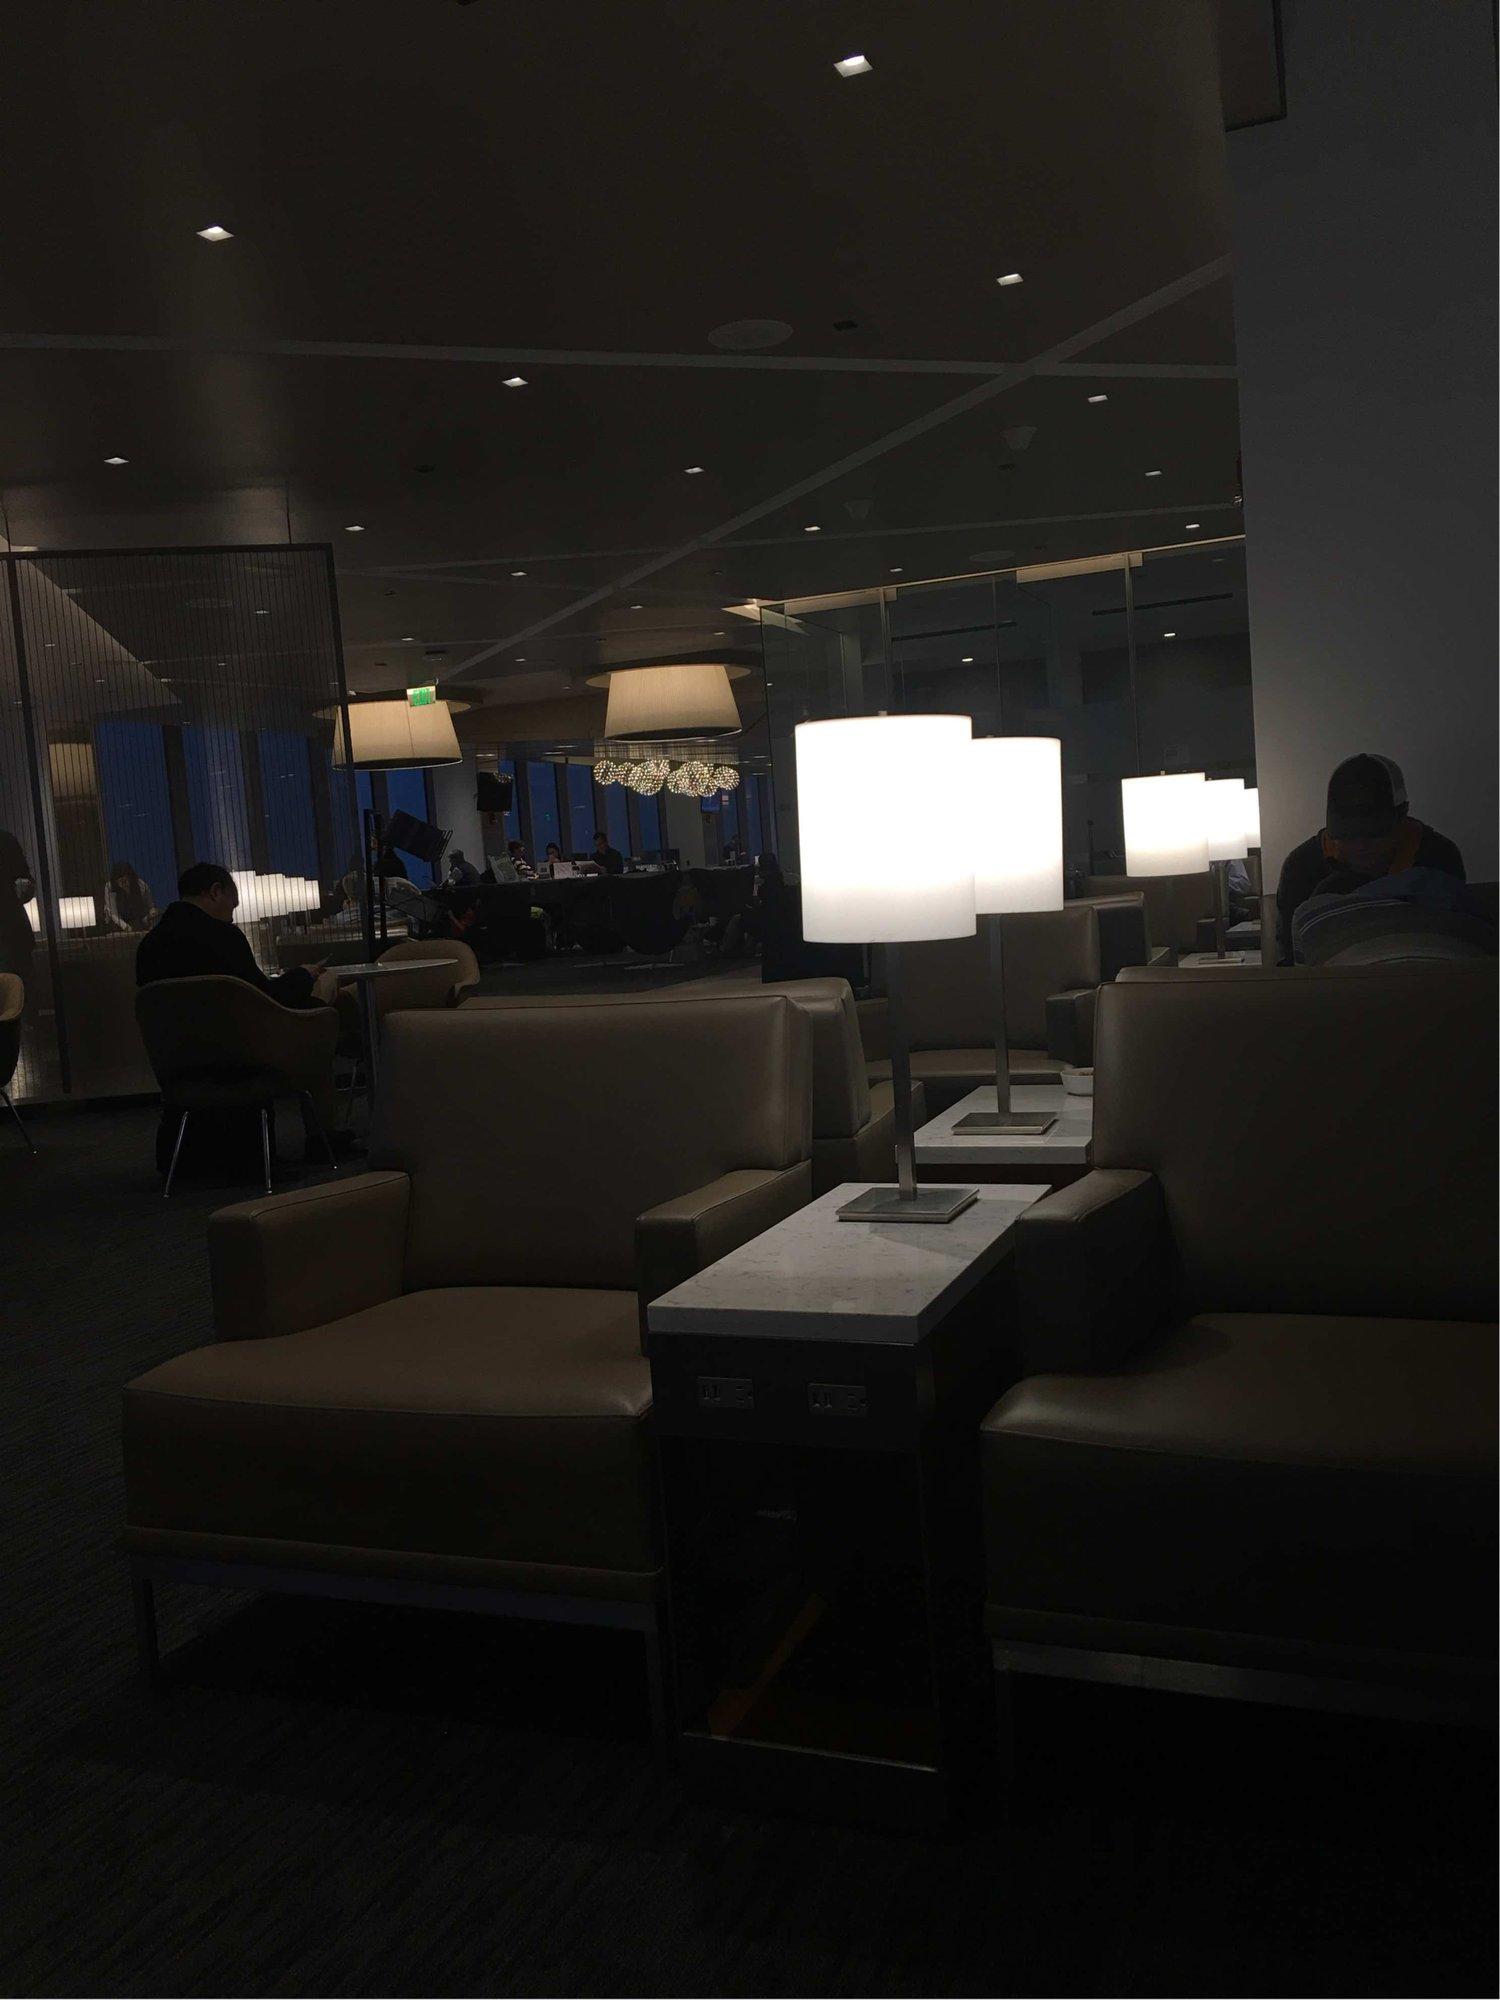 United Airlines United Club image 11 of 28